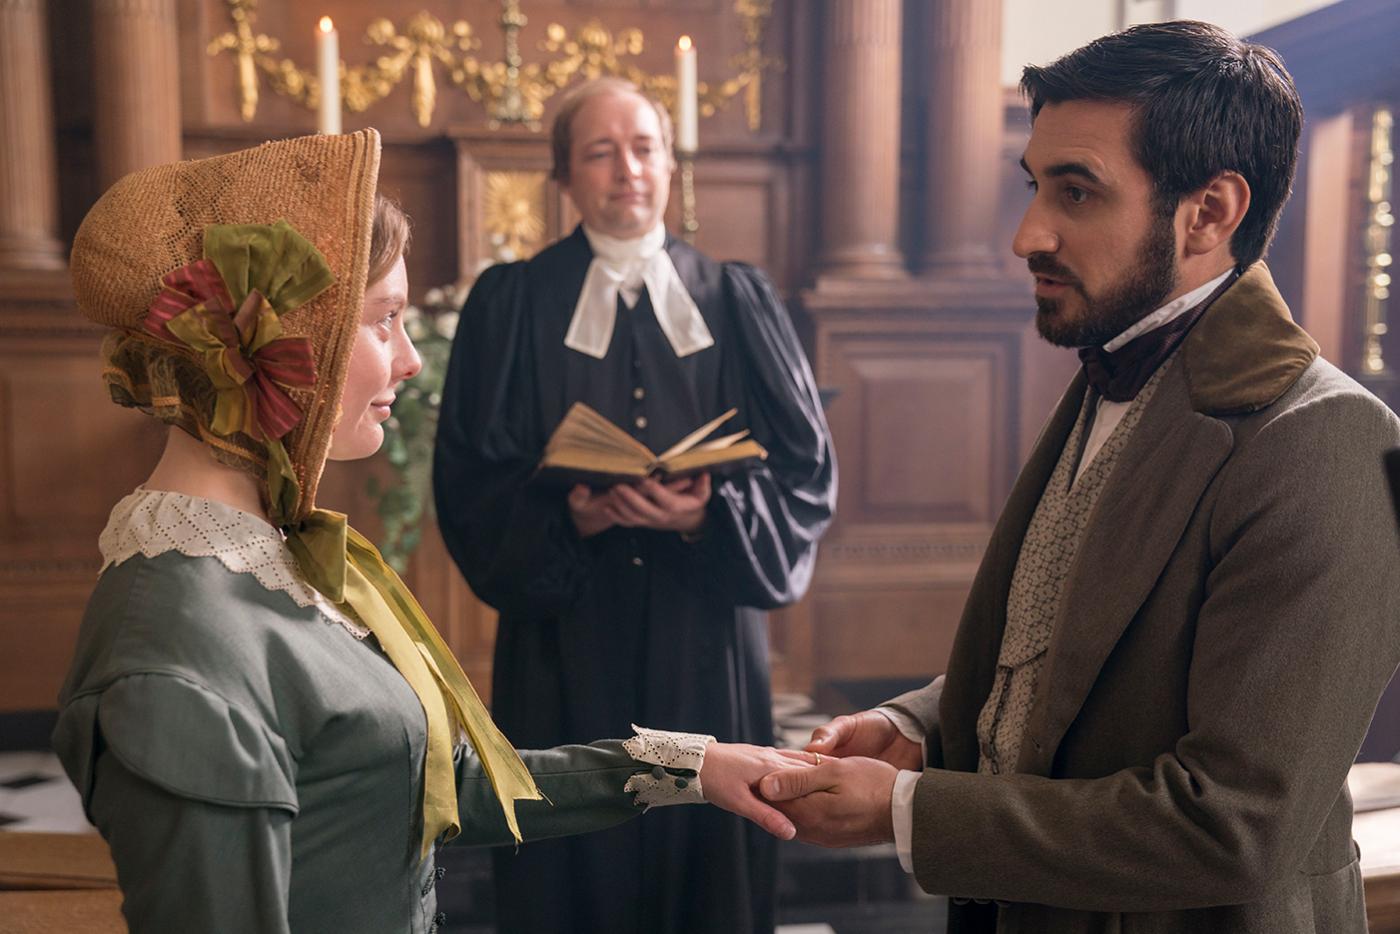 Nell Hudson as Skerrett and Ferdinand Kingsley as Francatelli in Victoria. Photo: Aimee Spinks/ITV Plc for MASTERPIECE